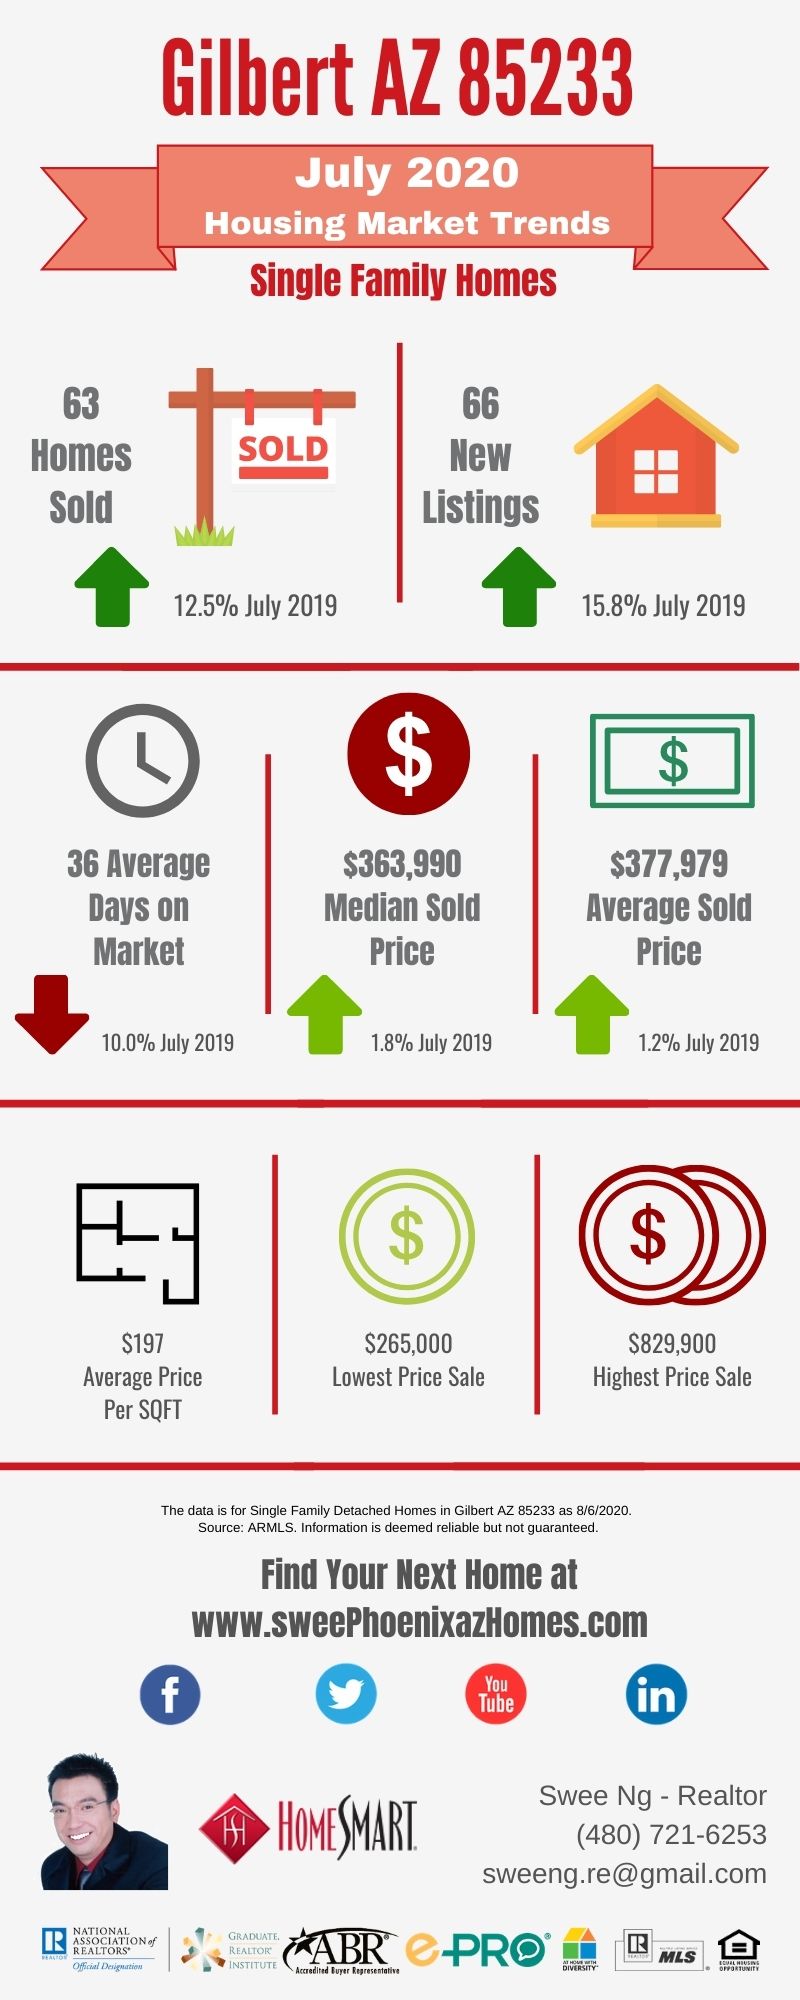 Gilbert AZ 85233 Housing Market Trends Report July 2020 by Swee Ng, Real Estate and House Value